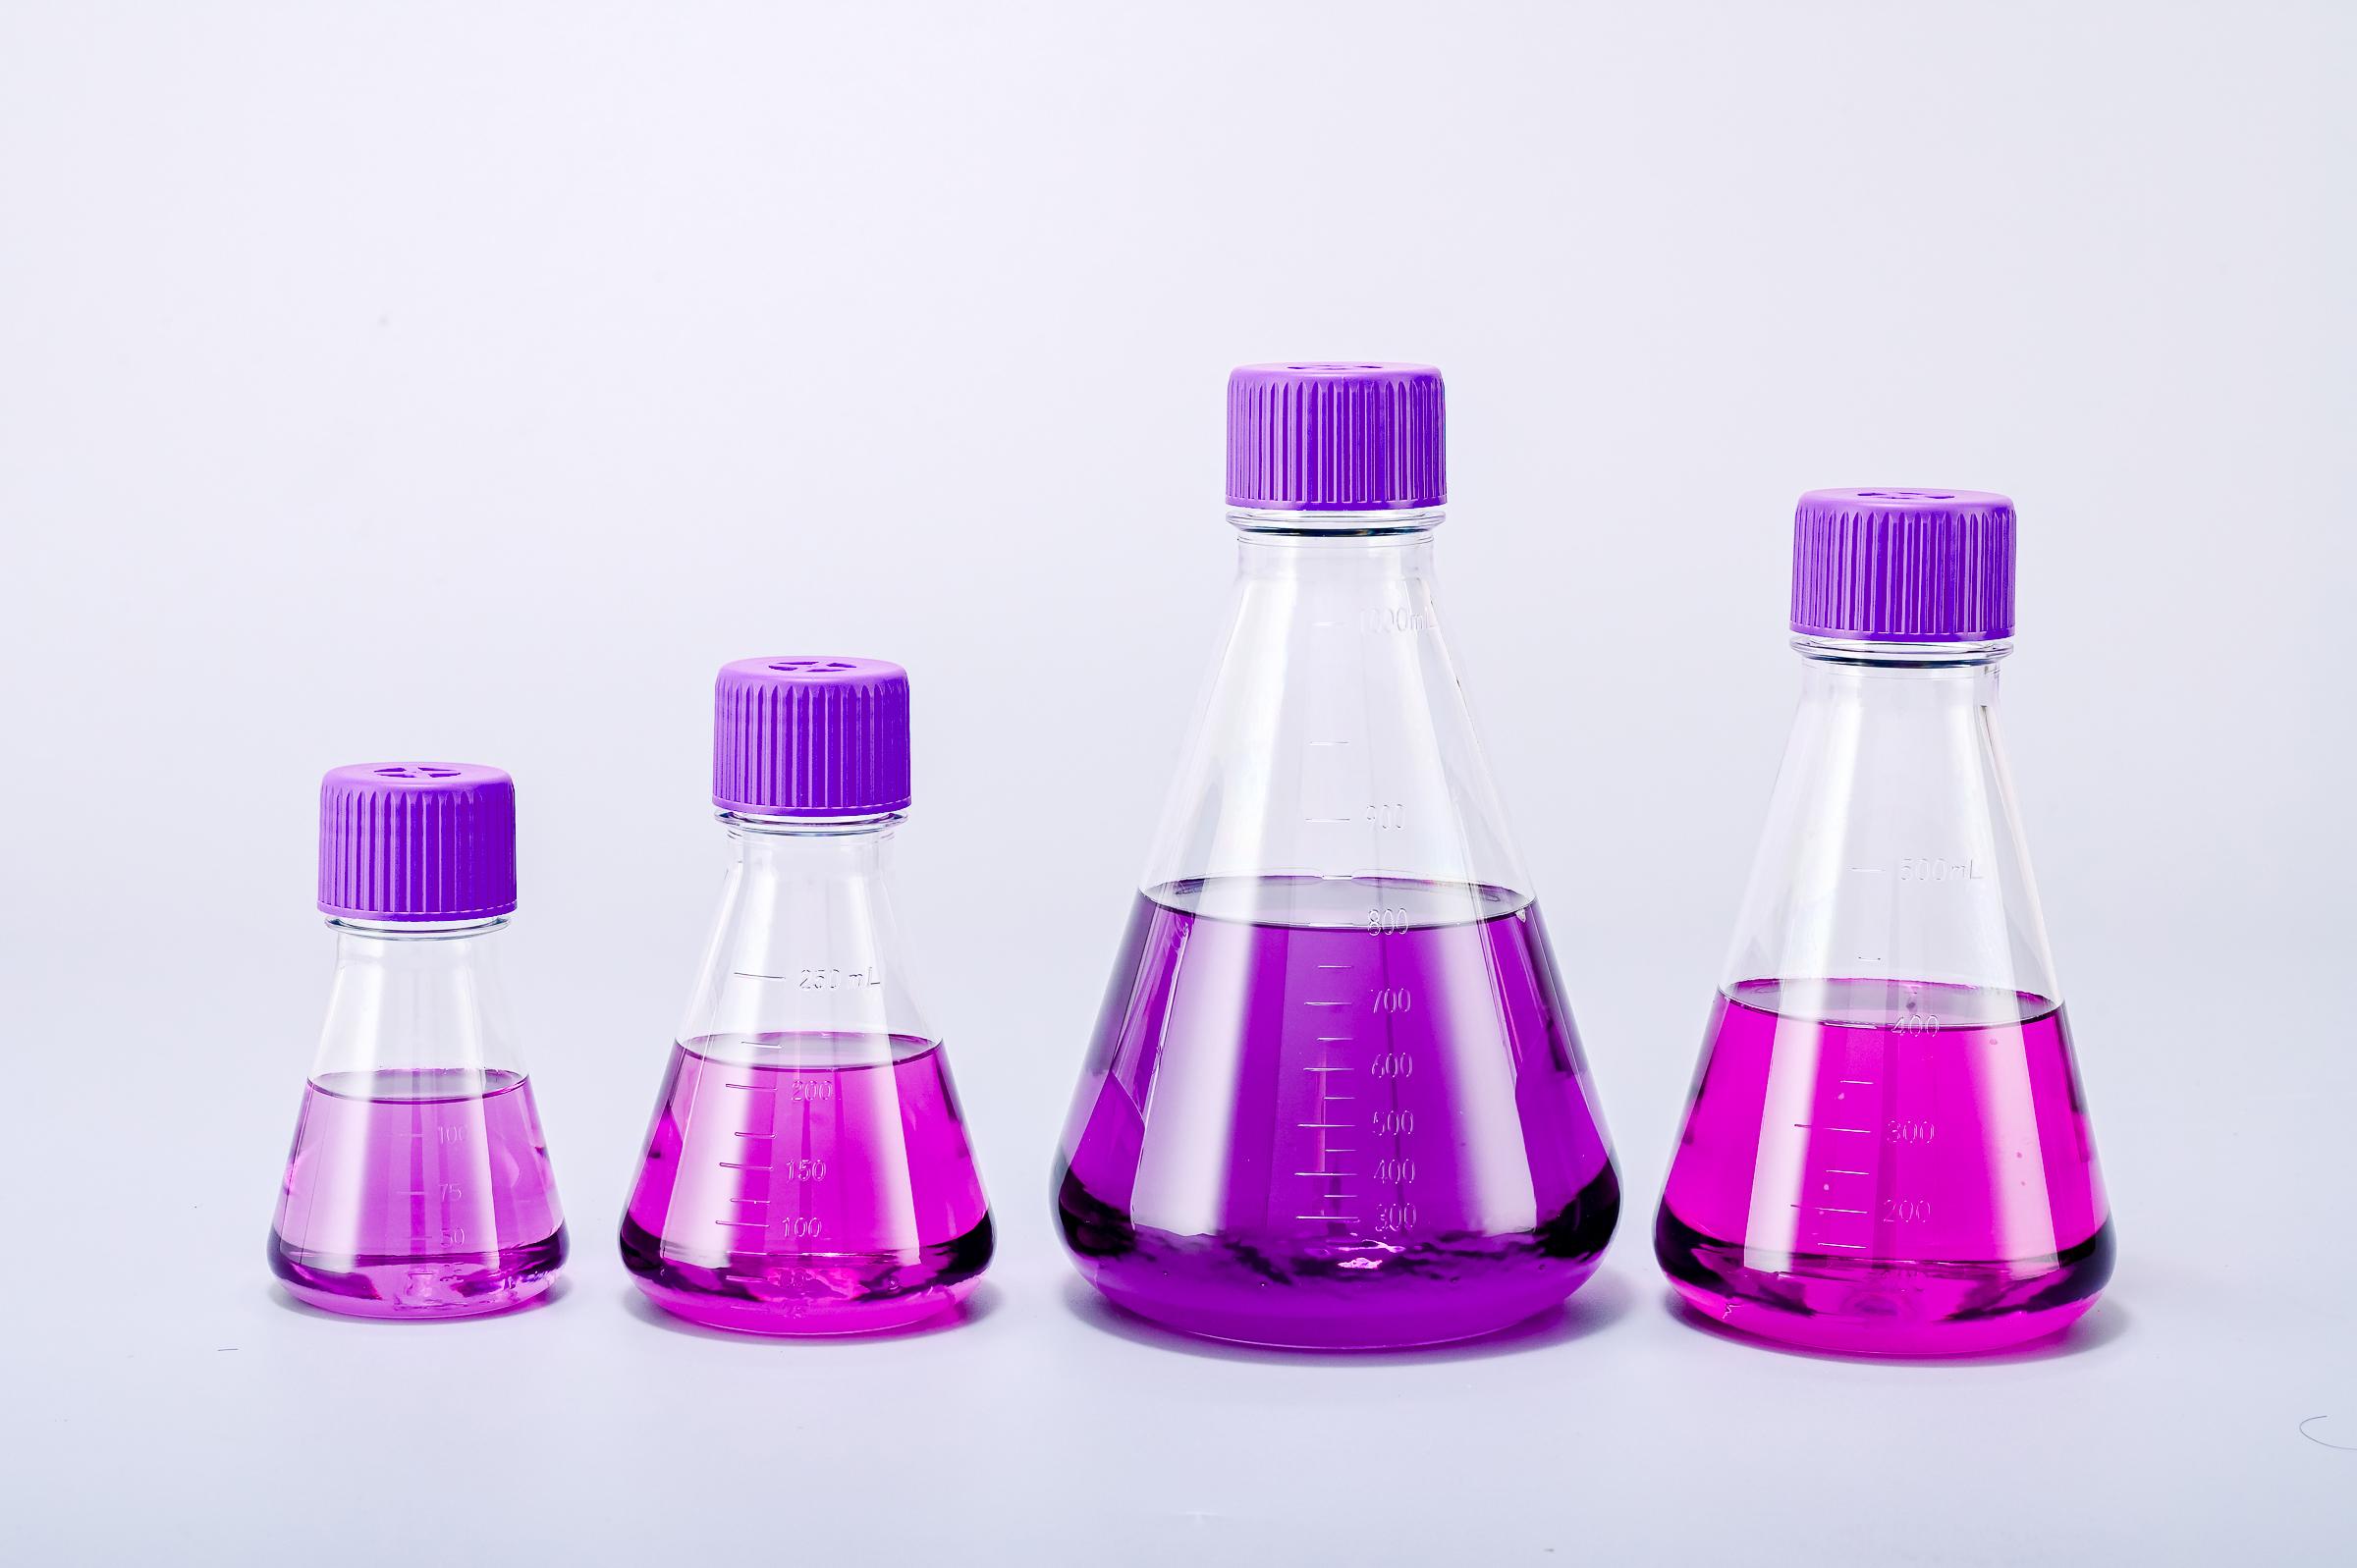 What are the advantages of using glass conical Erlenmeyer flasks in laboratory experiments?